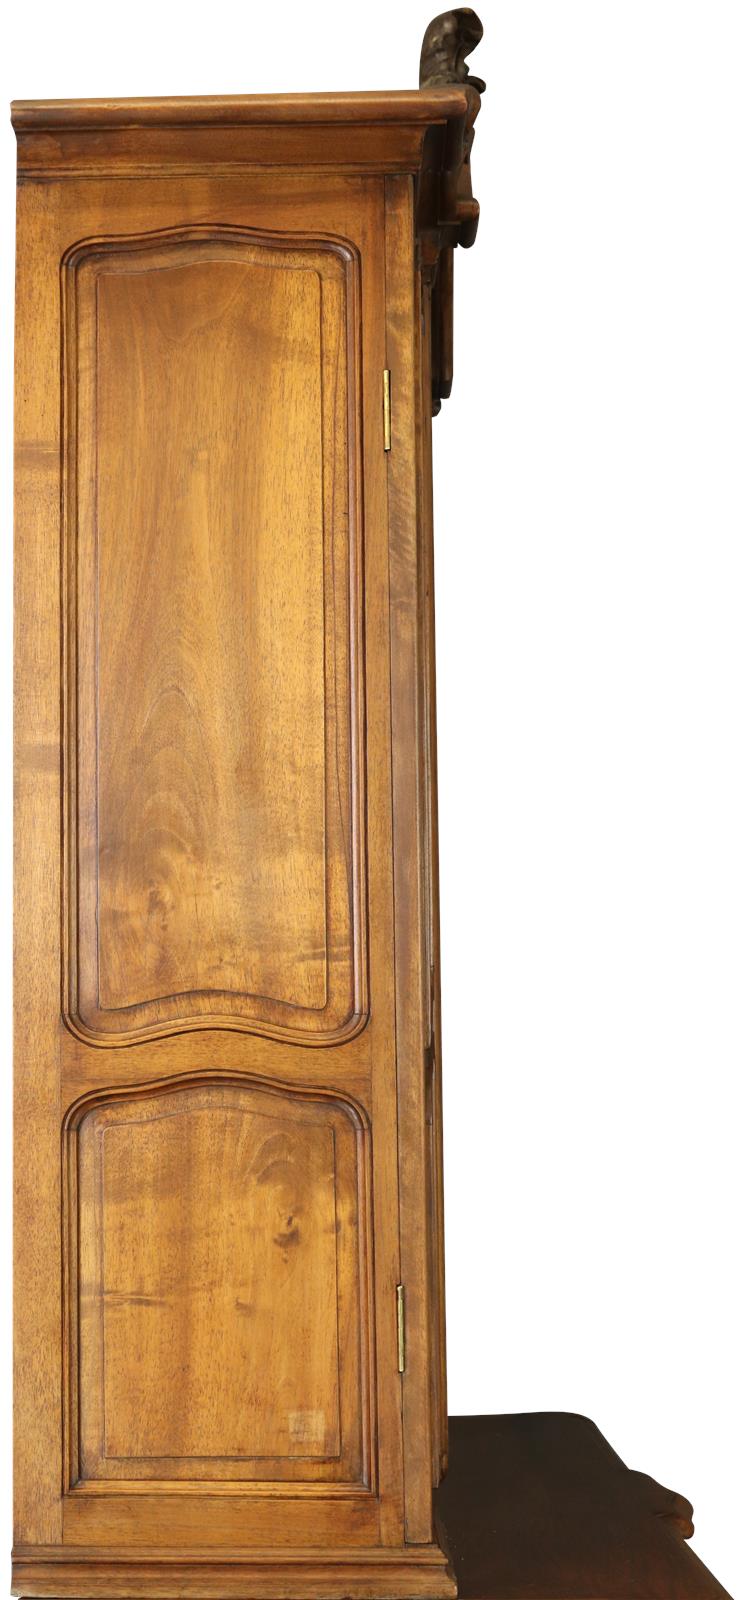 Cabinet Antique French Louis XV Rococo Walnut Wood 1900 Pretty Glass Door-Image 19